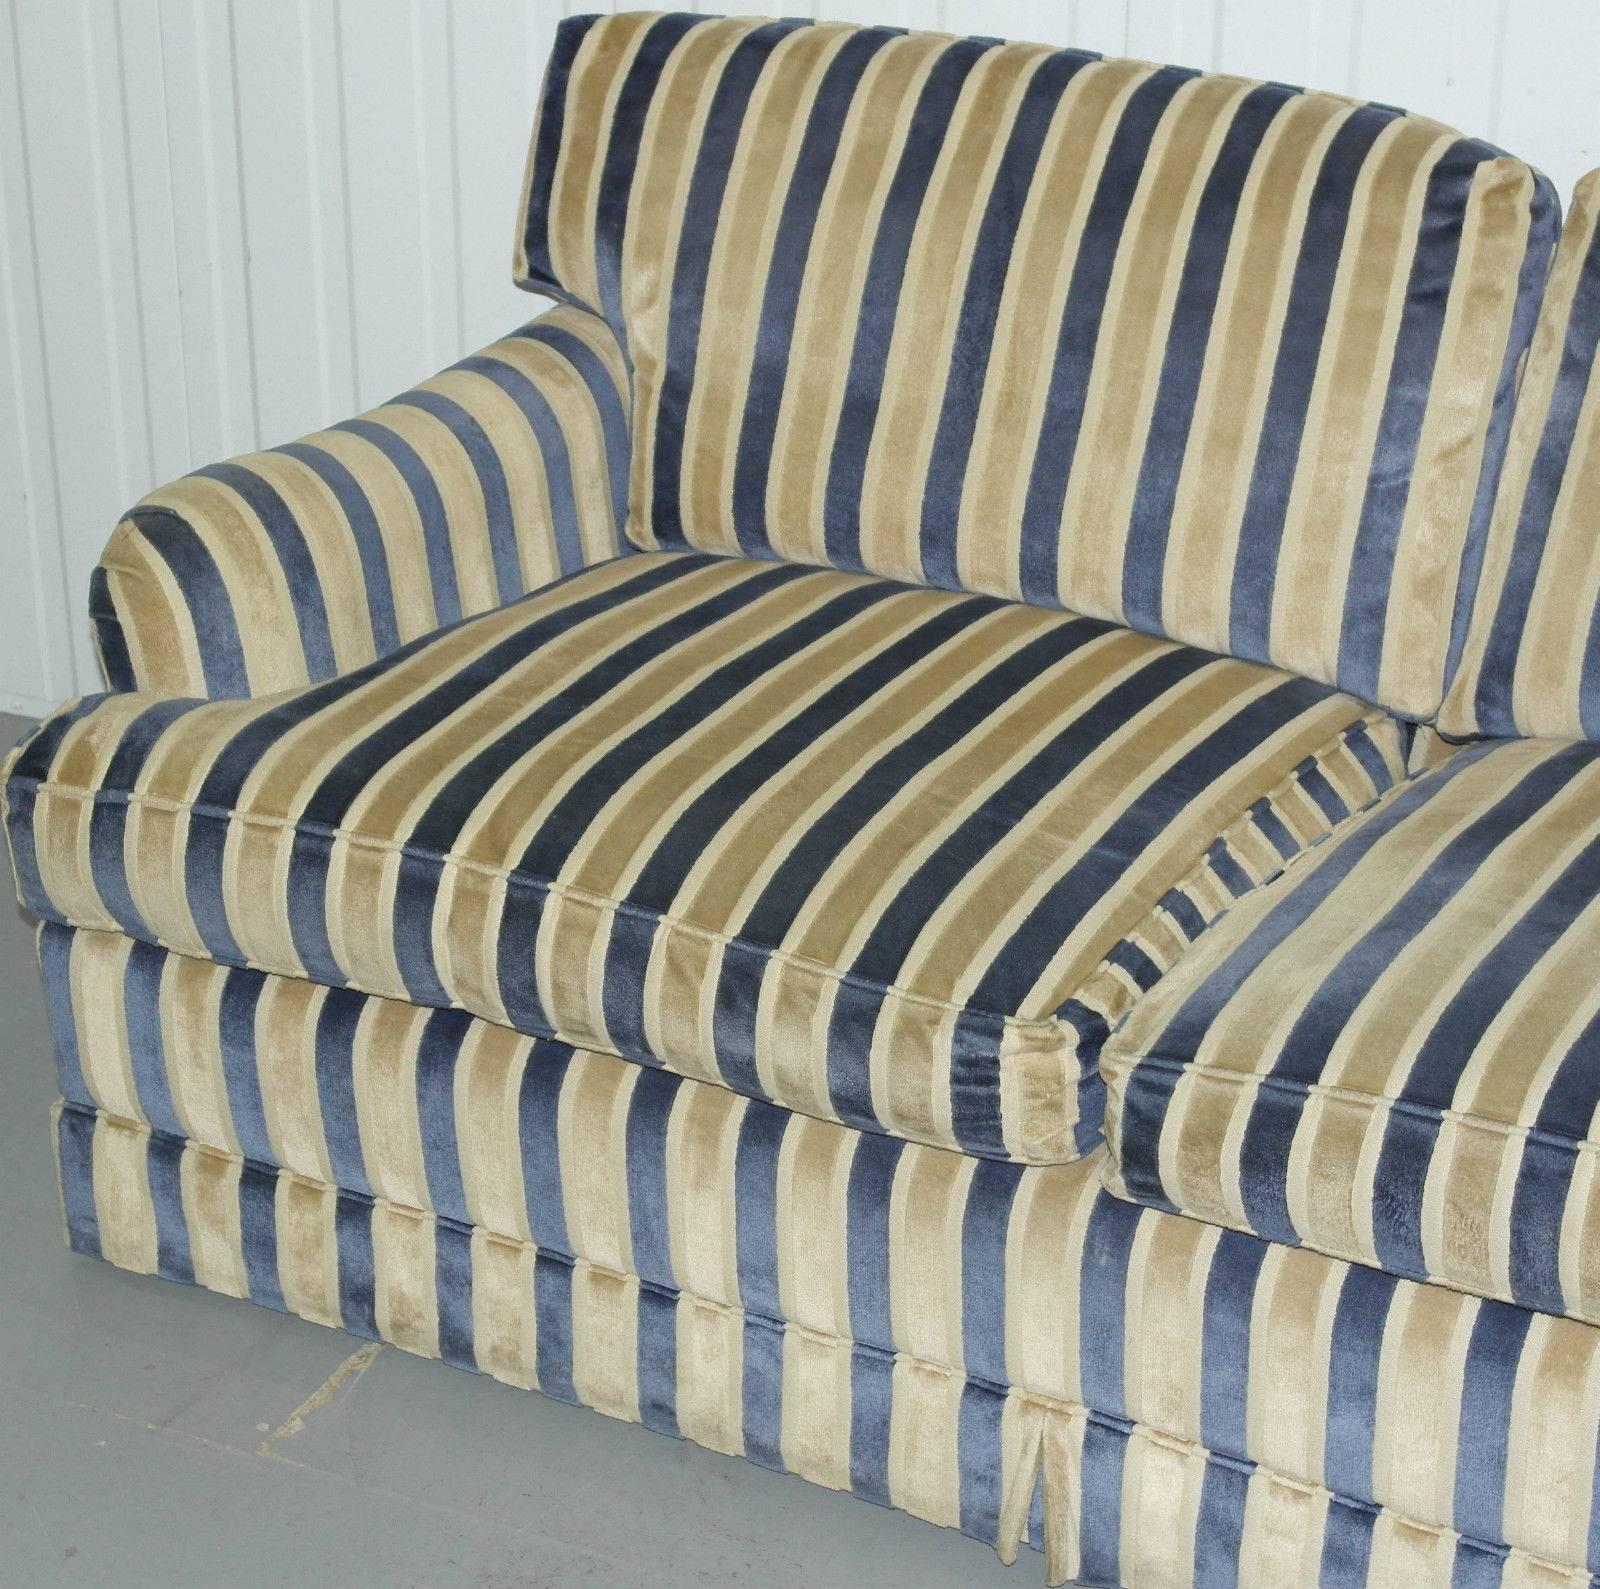 stripped couch